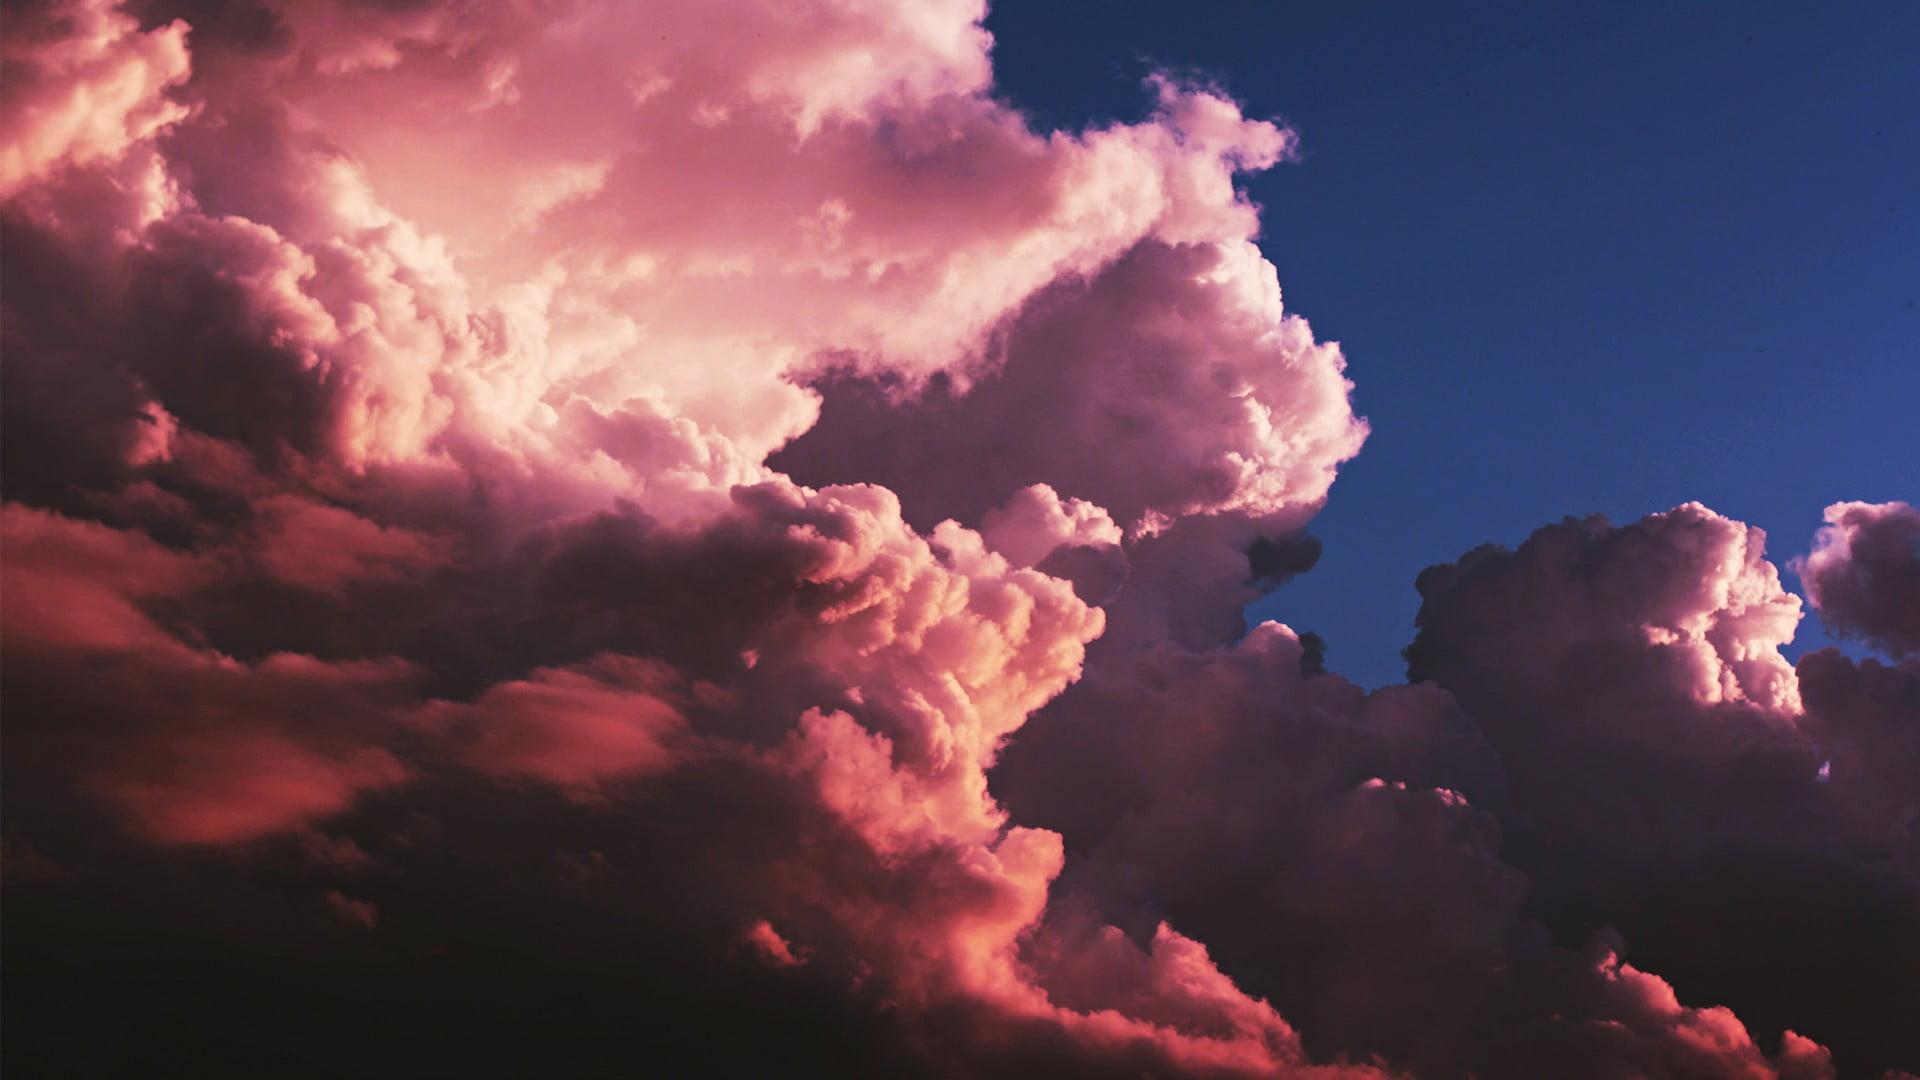 Aesthetic Cloud Background HD Free download